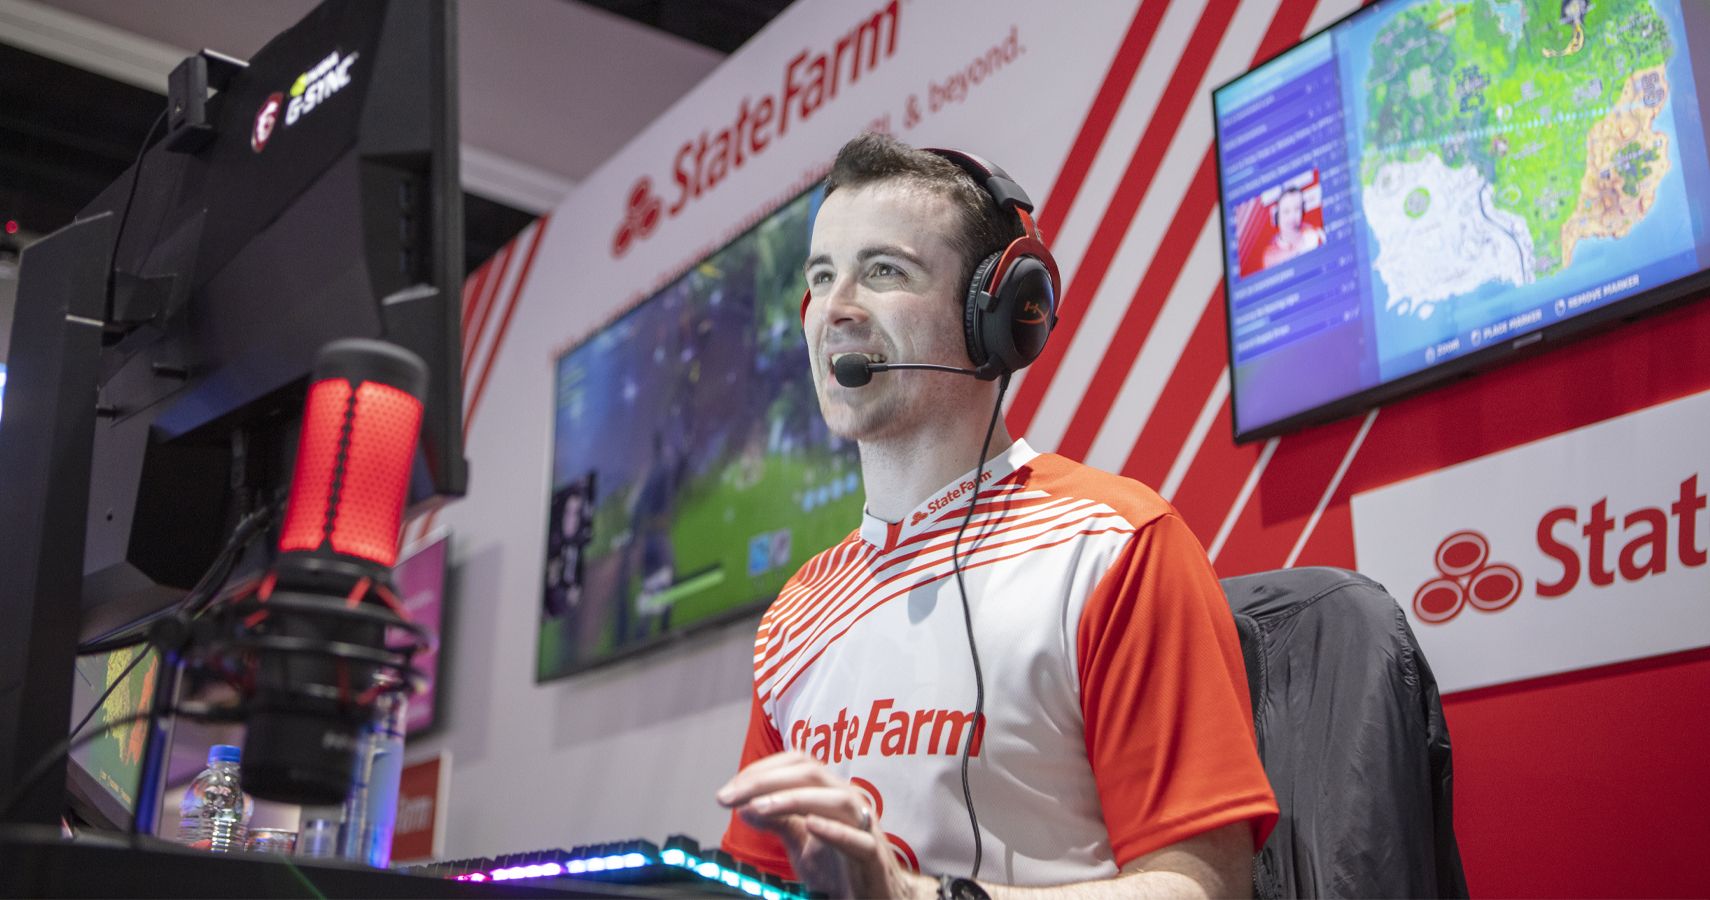 DrLupo Plans To Break Fundraising Record In State Farm Charity Stream Finale